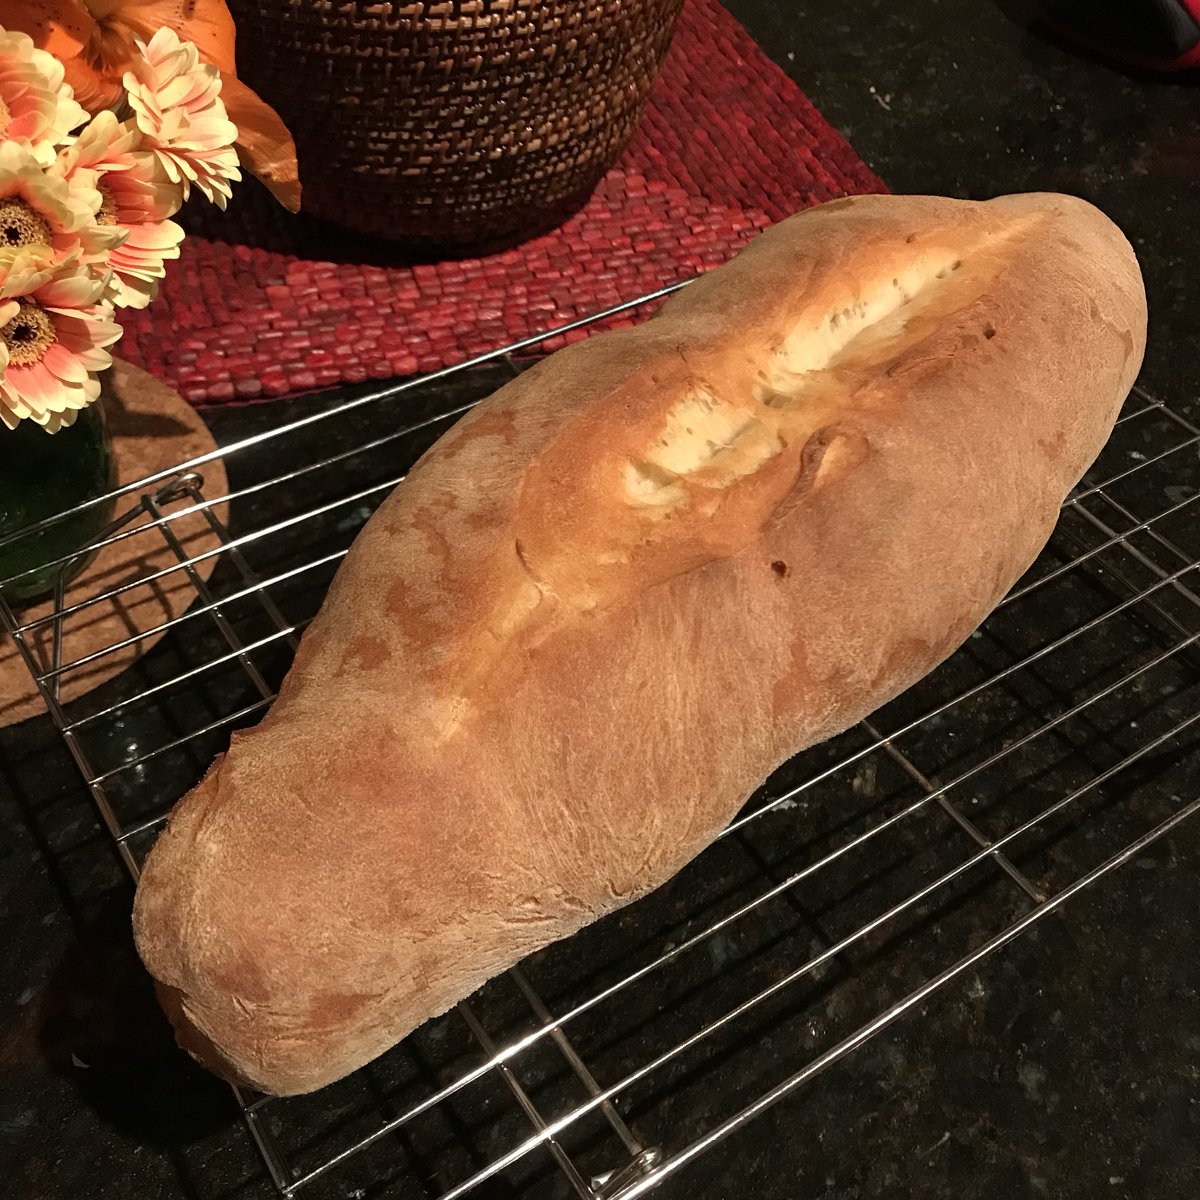 Bread #5: Classic Italian Bread. This is a really tasty bread w/ a beautiful crunchy crust. I cut it before it was cool or the crumb would probably look prettier  it took forever but mostly rising time. Would be great for a fancy dinner. I’m still kinda bad at shaping loaves.